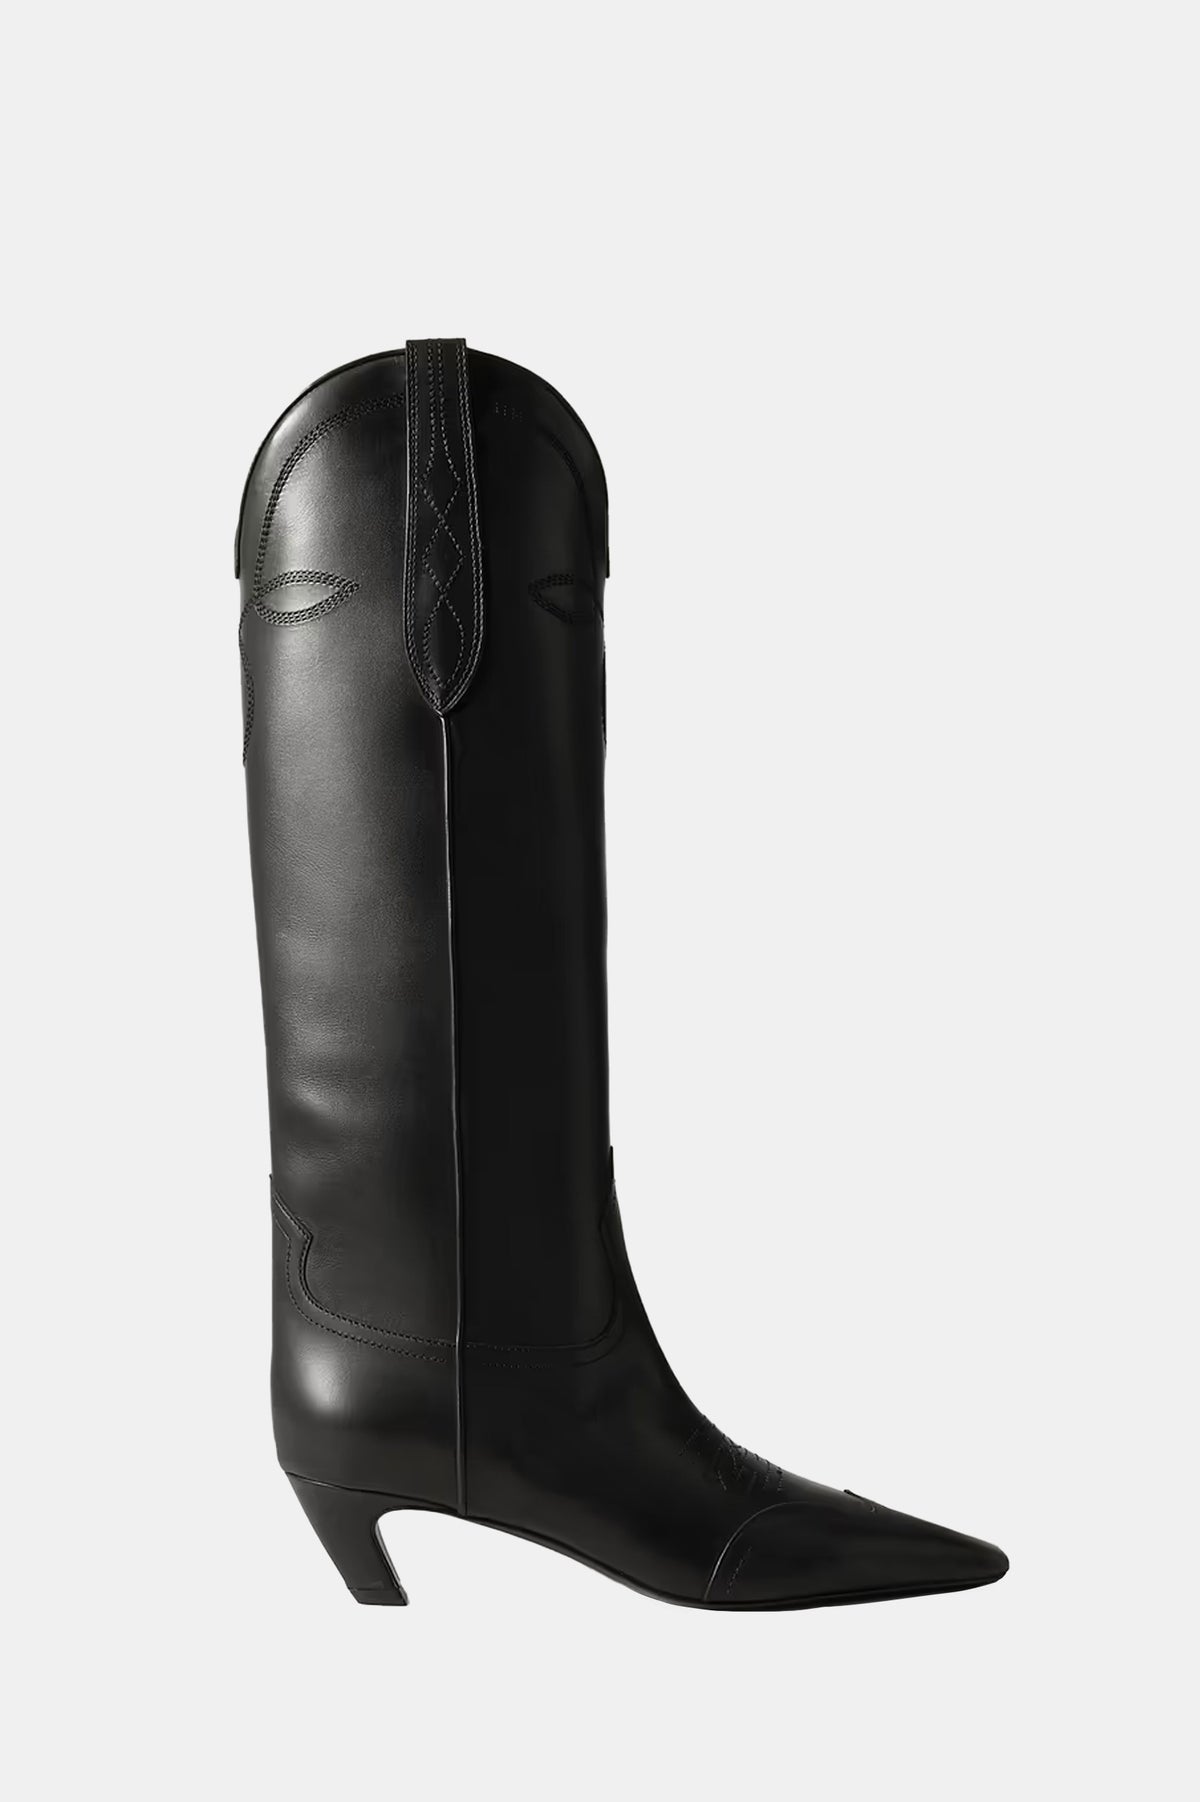 Dallas Knee High Boot in Black Leather